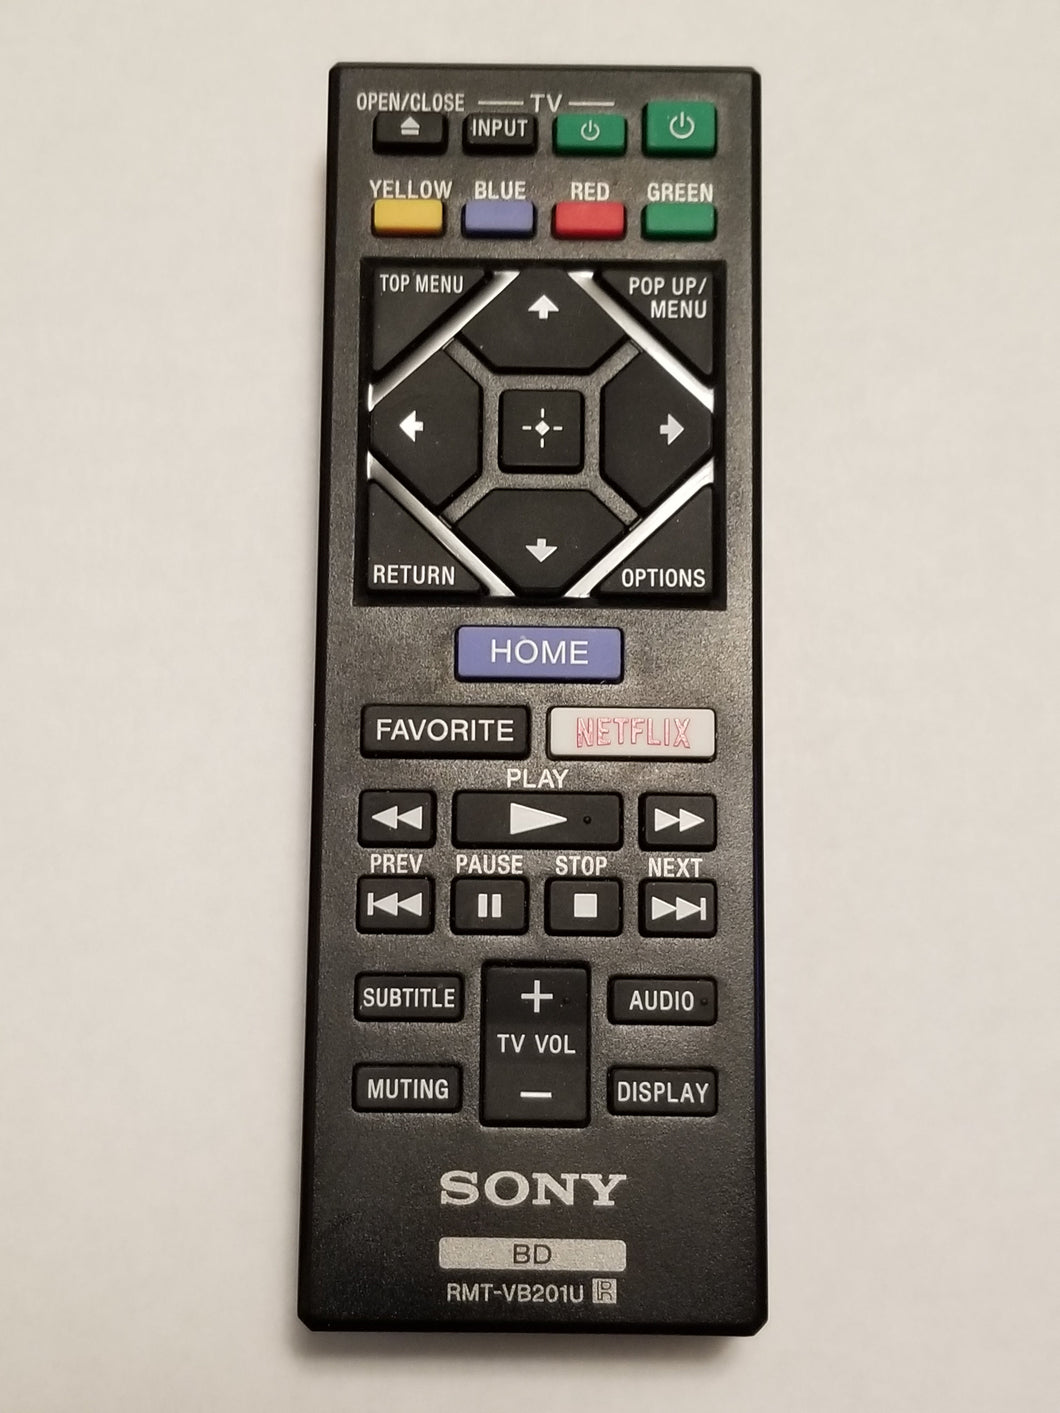 RMT-VB201U Sony Bluray Player DVD Remote Control for Sony BDP-S3700